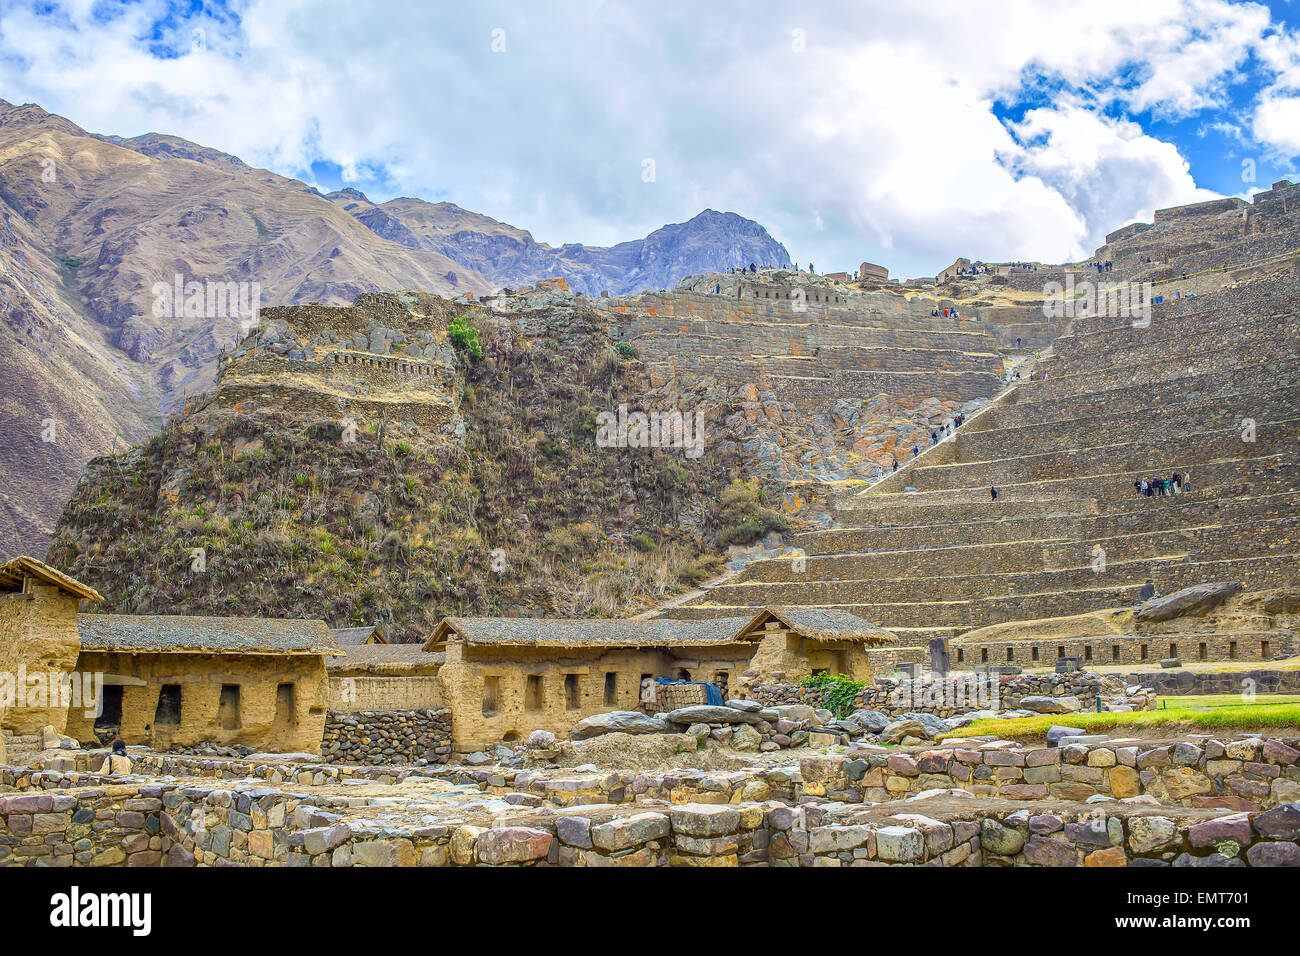 Ruins of Incan hillside fortress at the town of Ollantaytambo in Peru Stock Photo